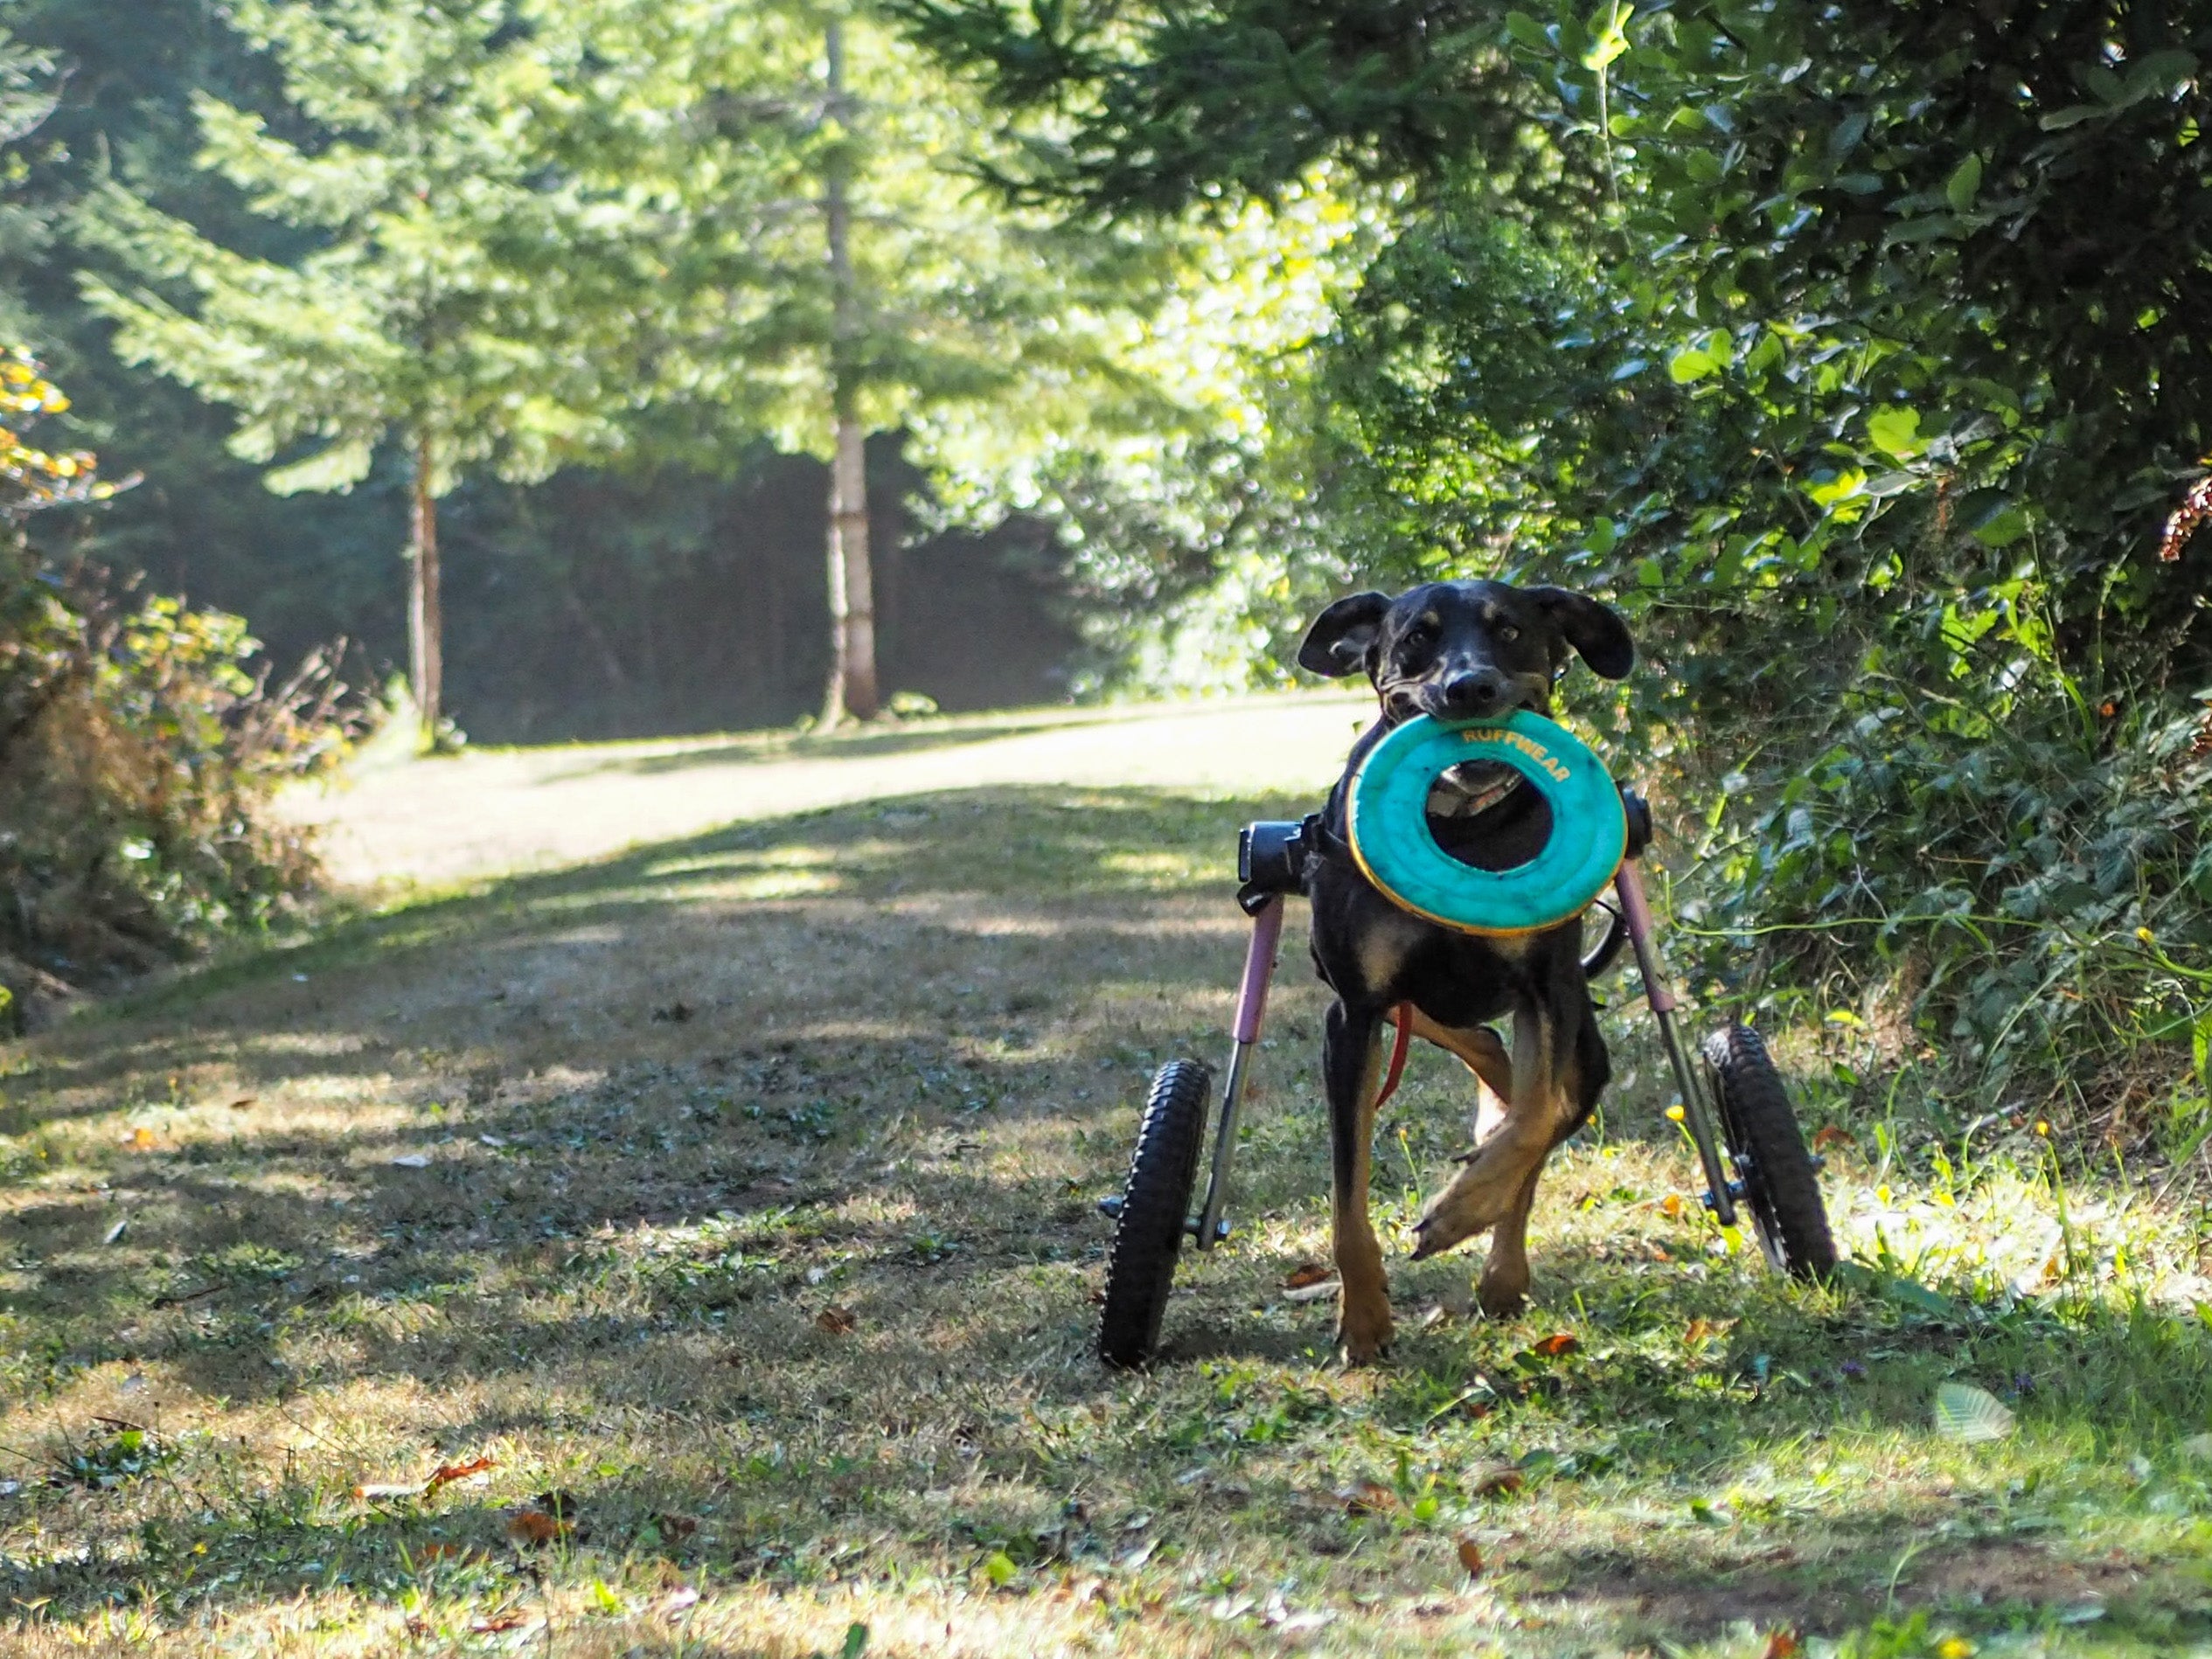 A dog runs in the park with the Ruffwear Hydro Plane™ Floating Throw Toy.